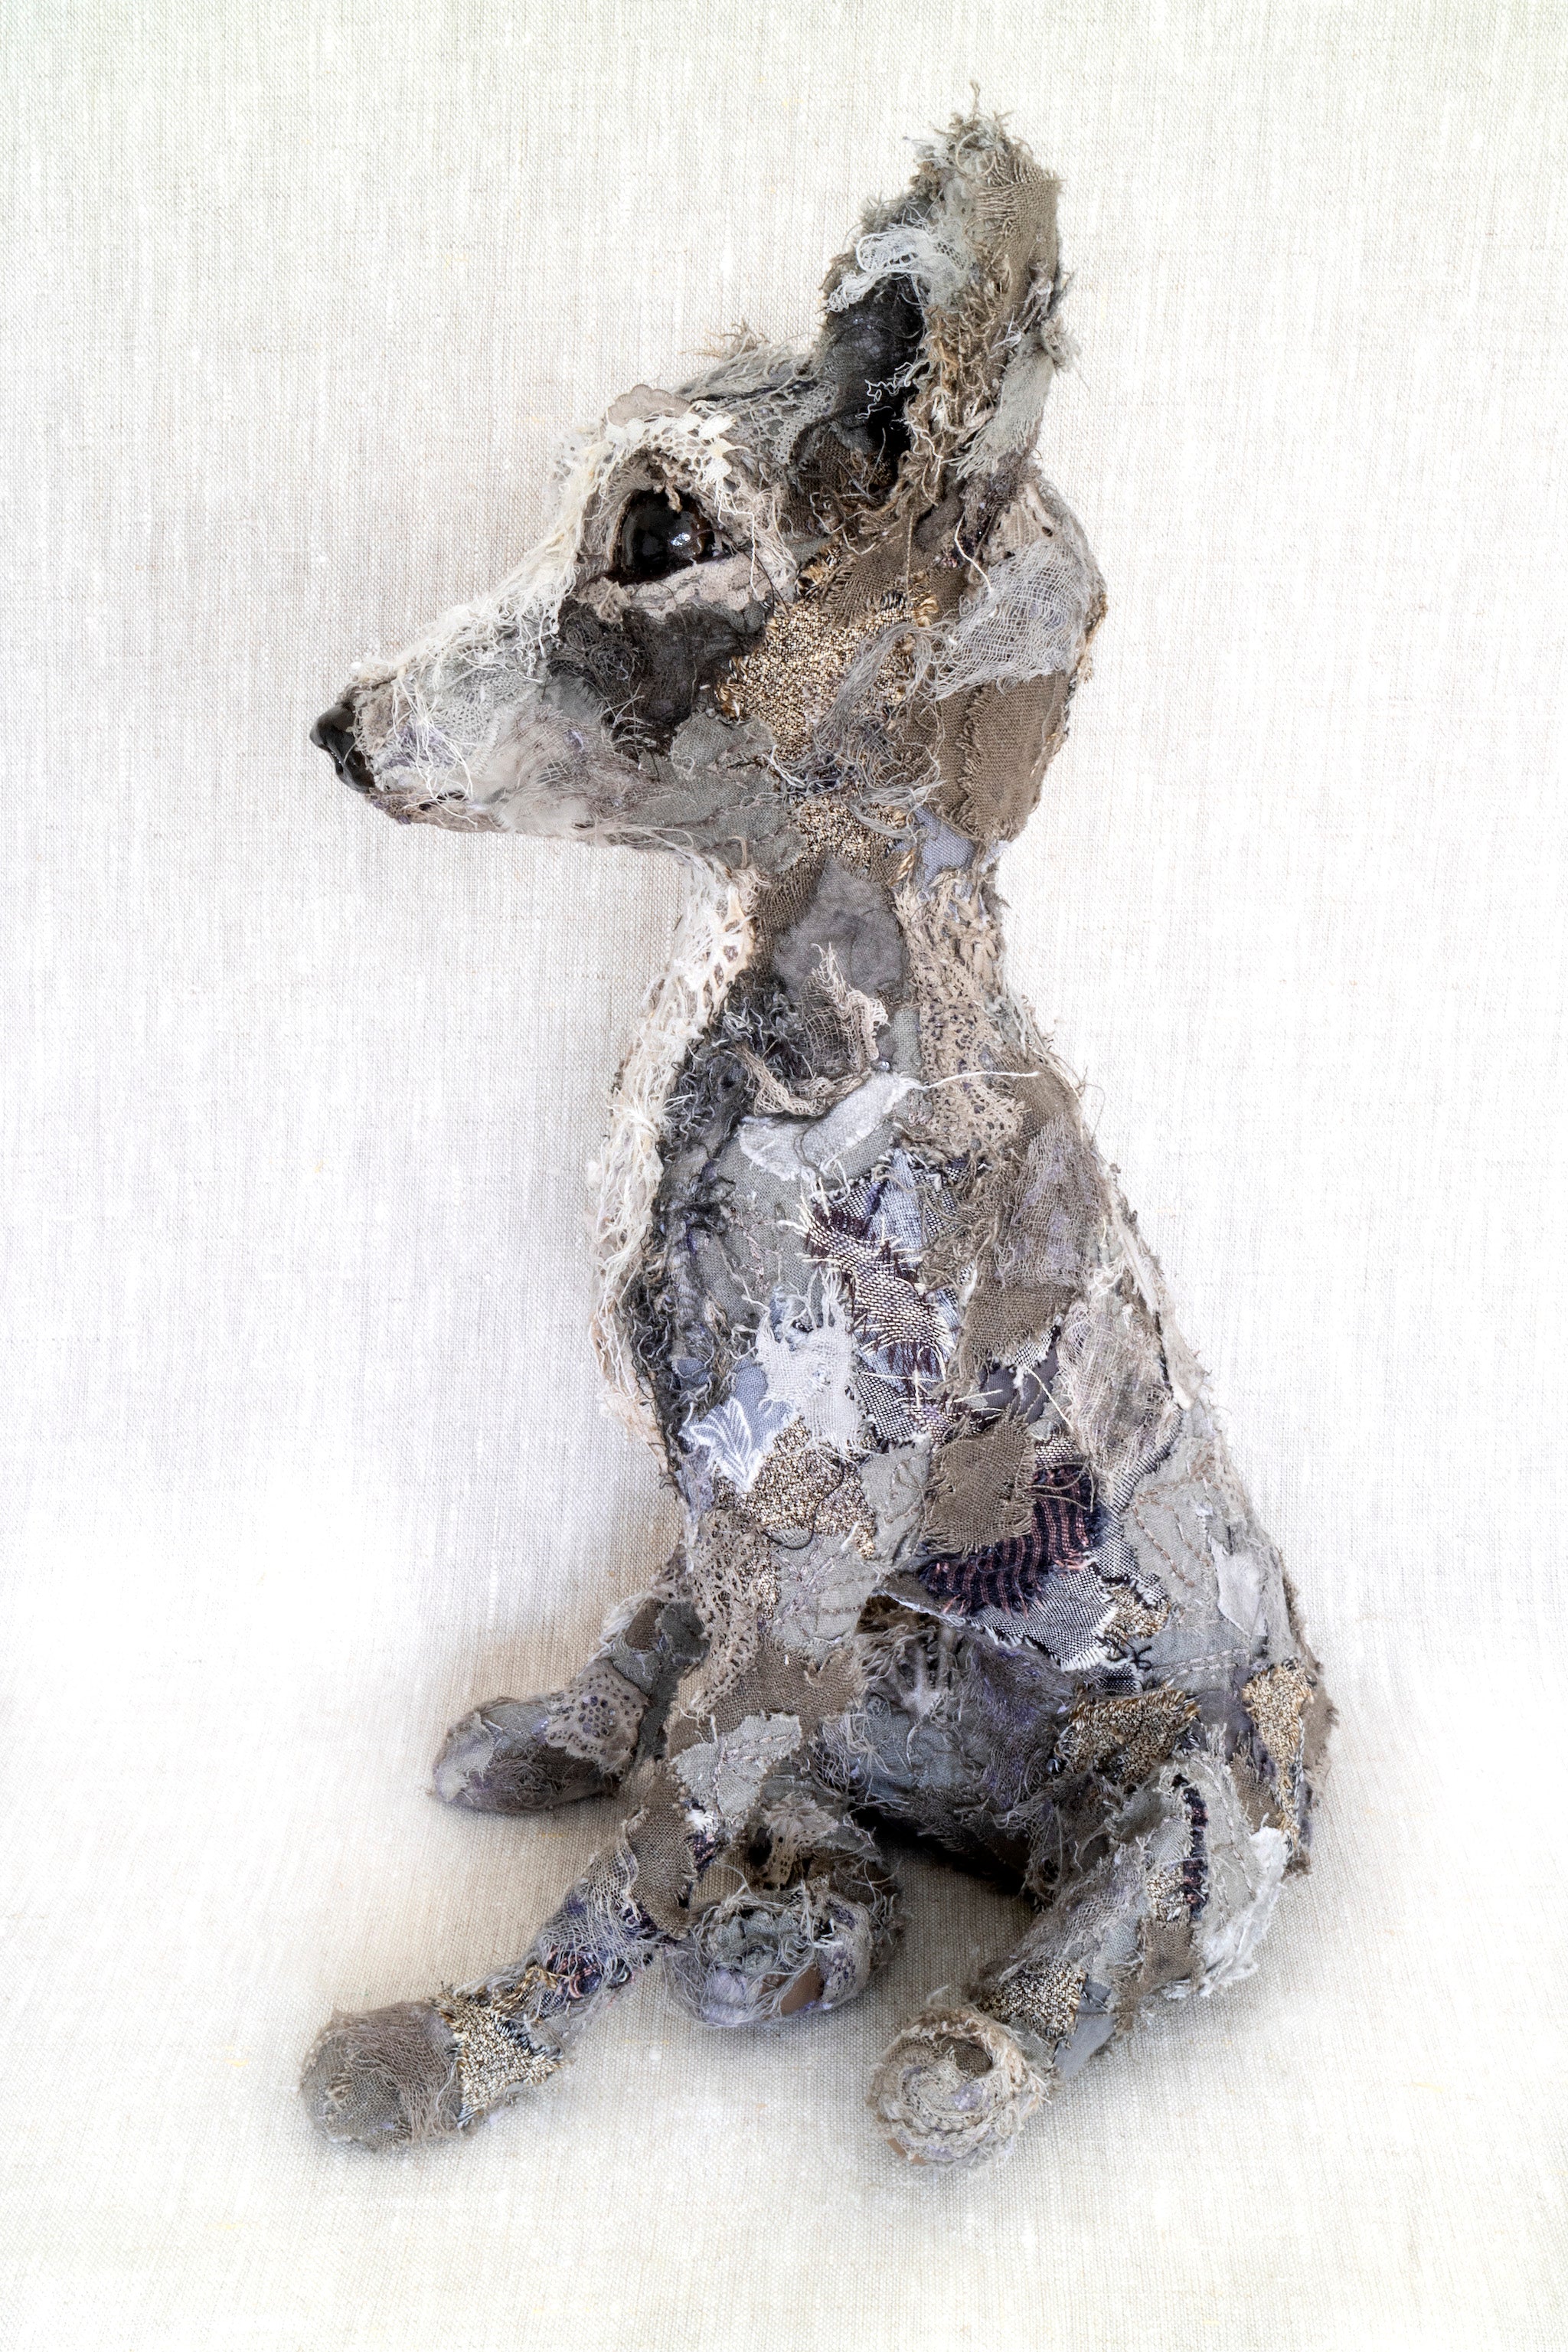 Chihuahua textile sculpture created from vintage and antique textiles